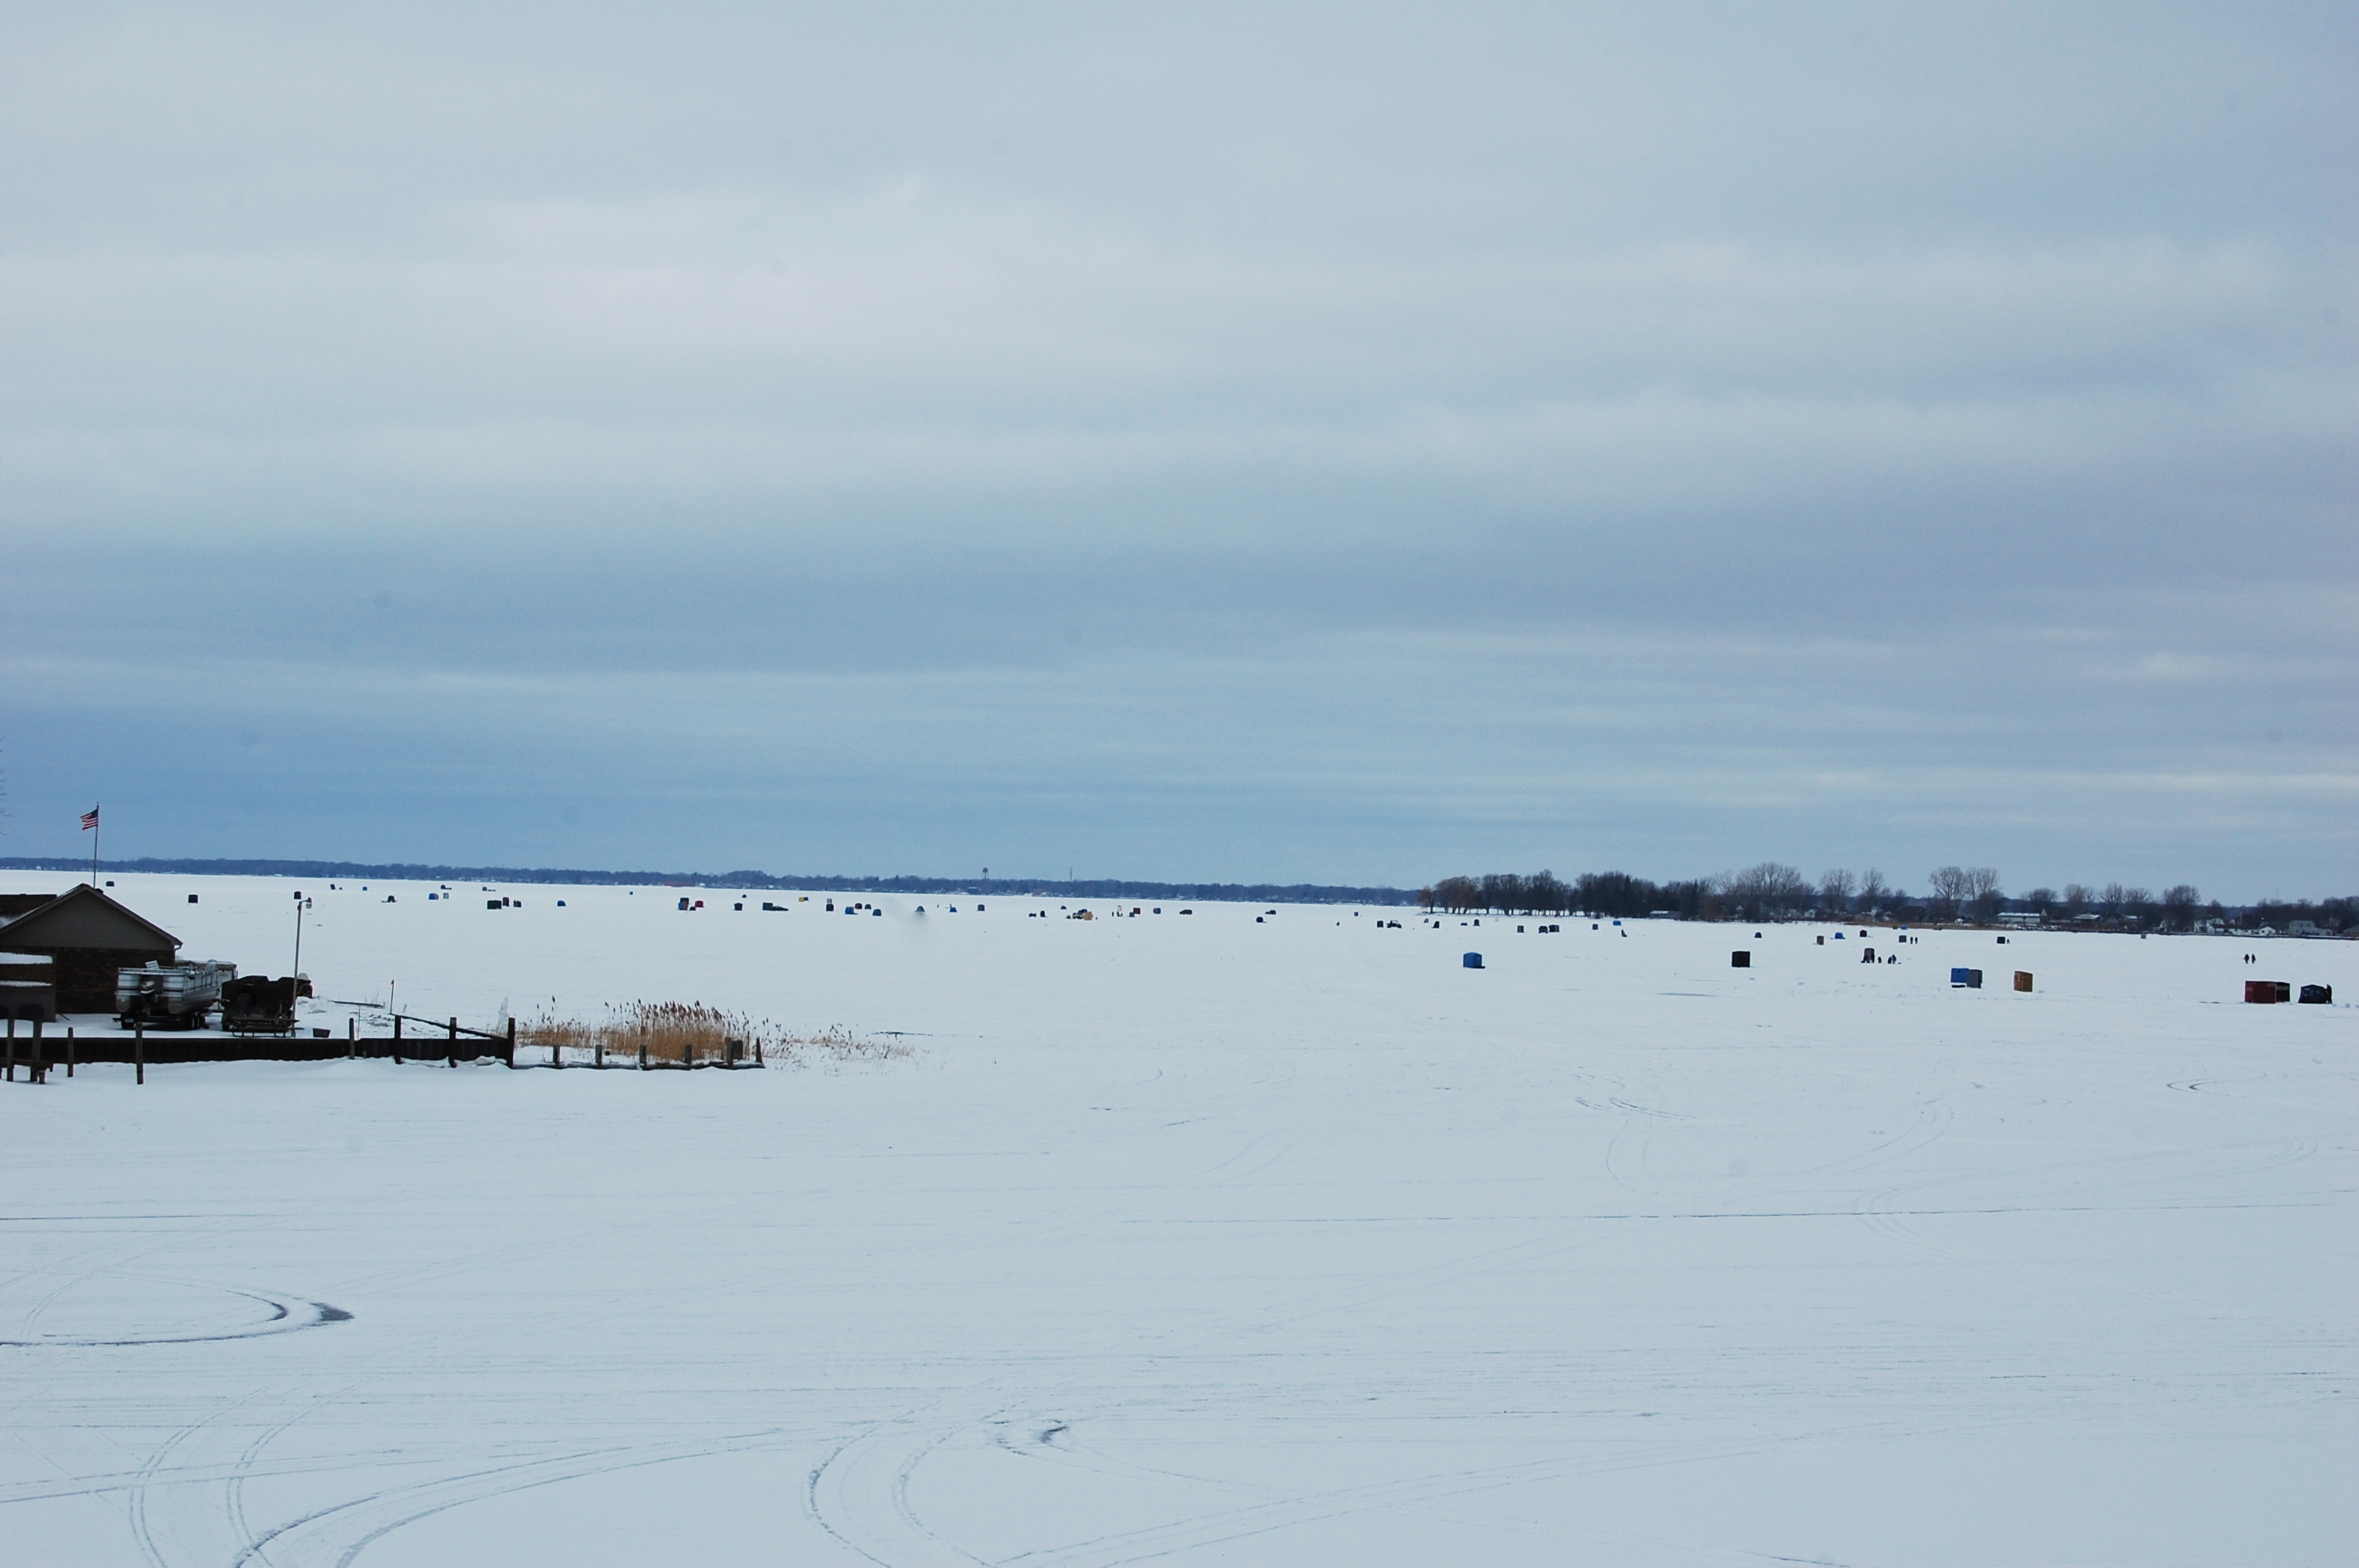 Lots of Ice Fishermen way out near the Fair Haven Point